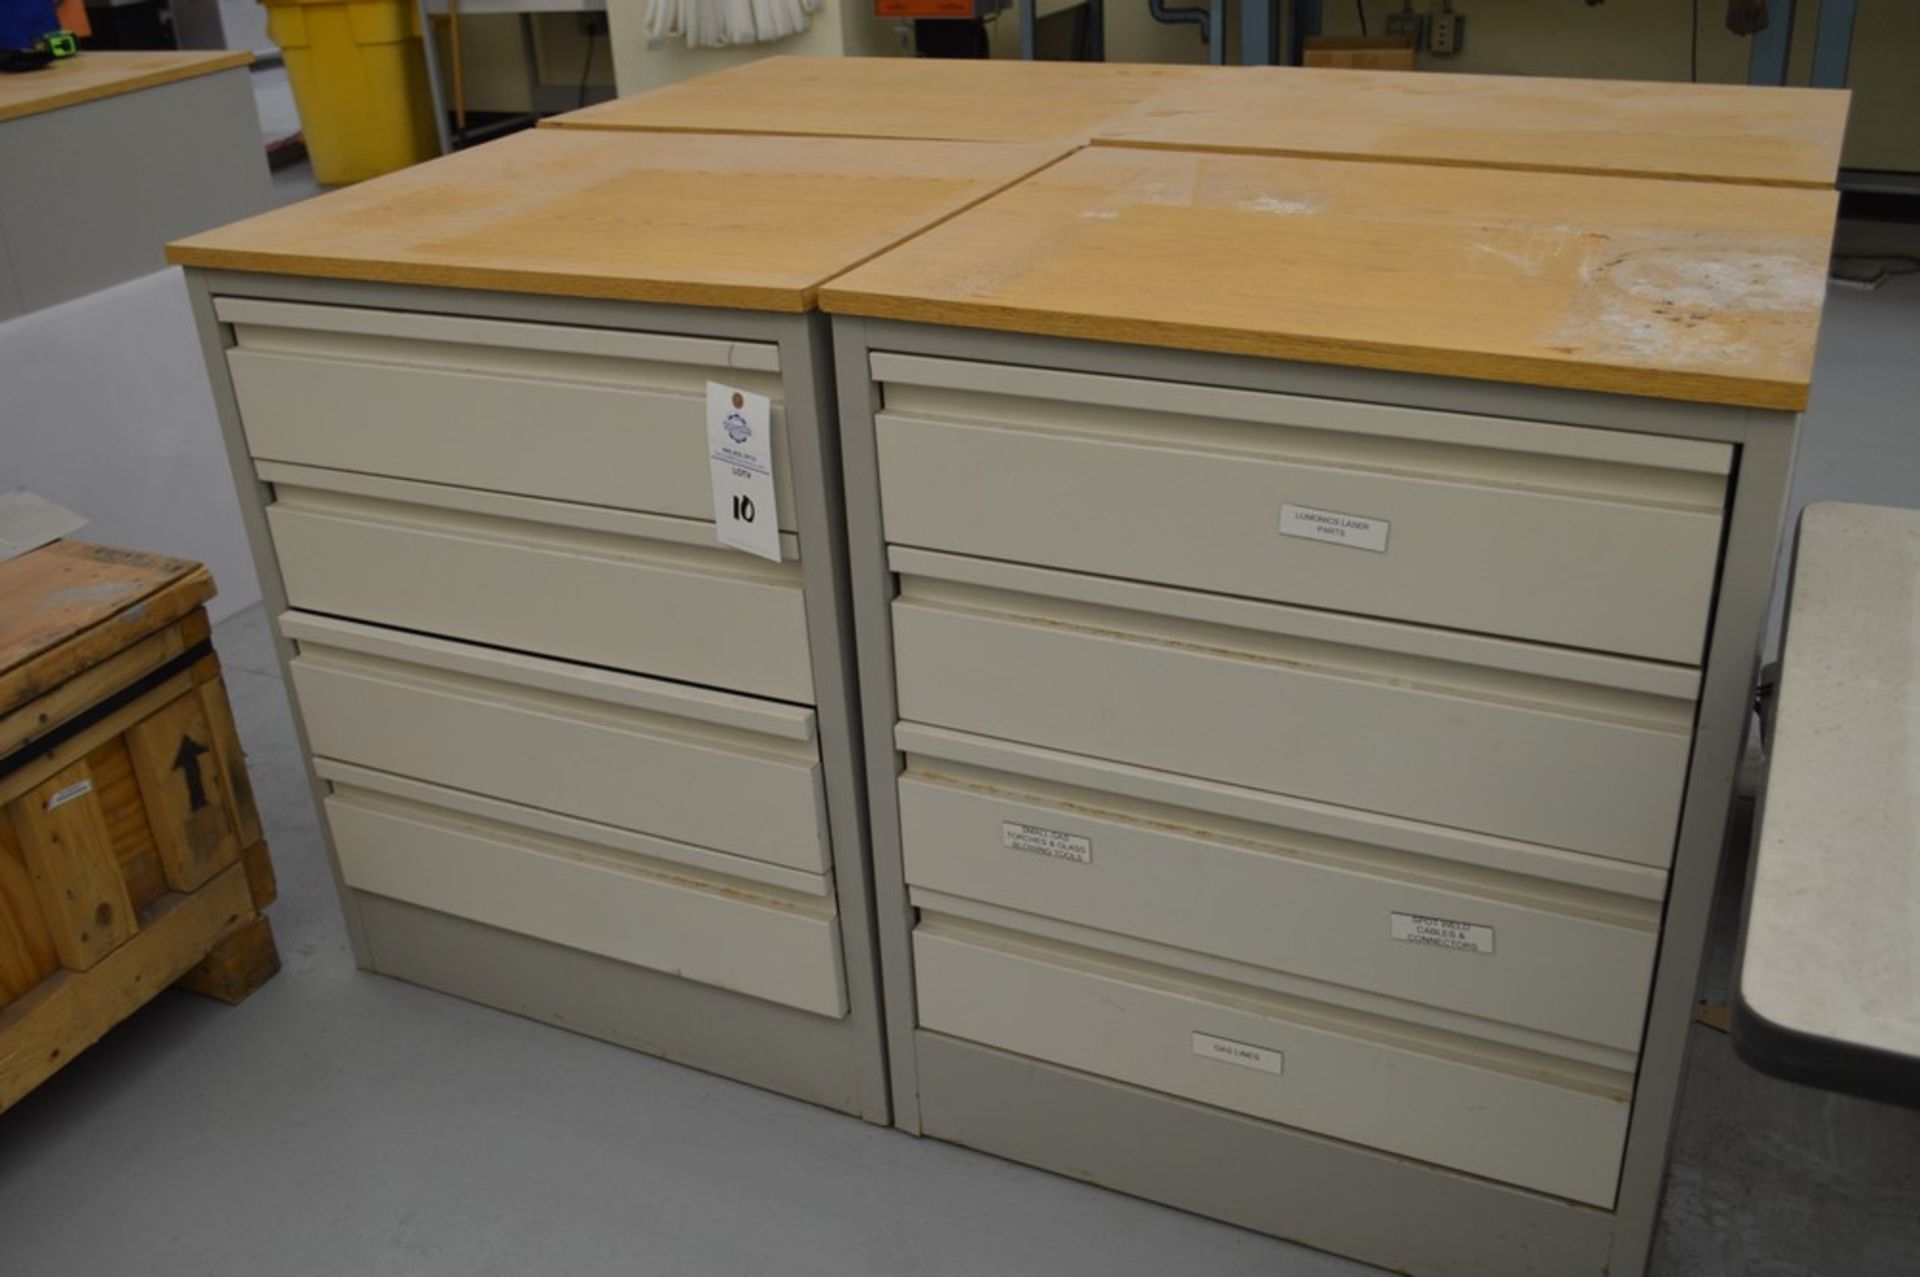 (3) 4 Drawer Metal Cabinets with wood finished formica tops, 24" x 30.5", 36.5" Tall - Image 2 of 5